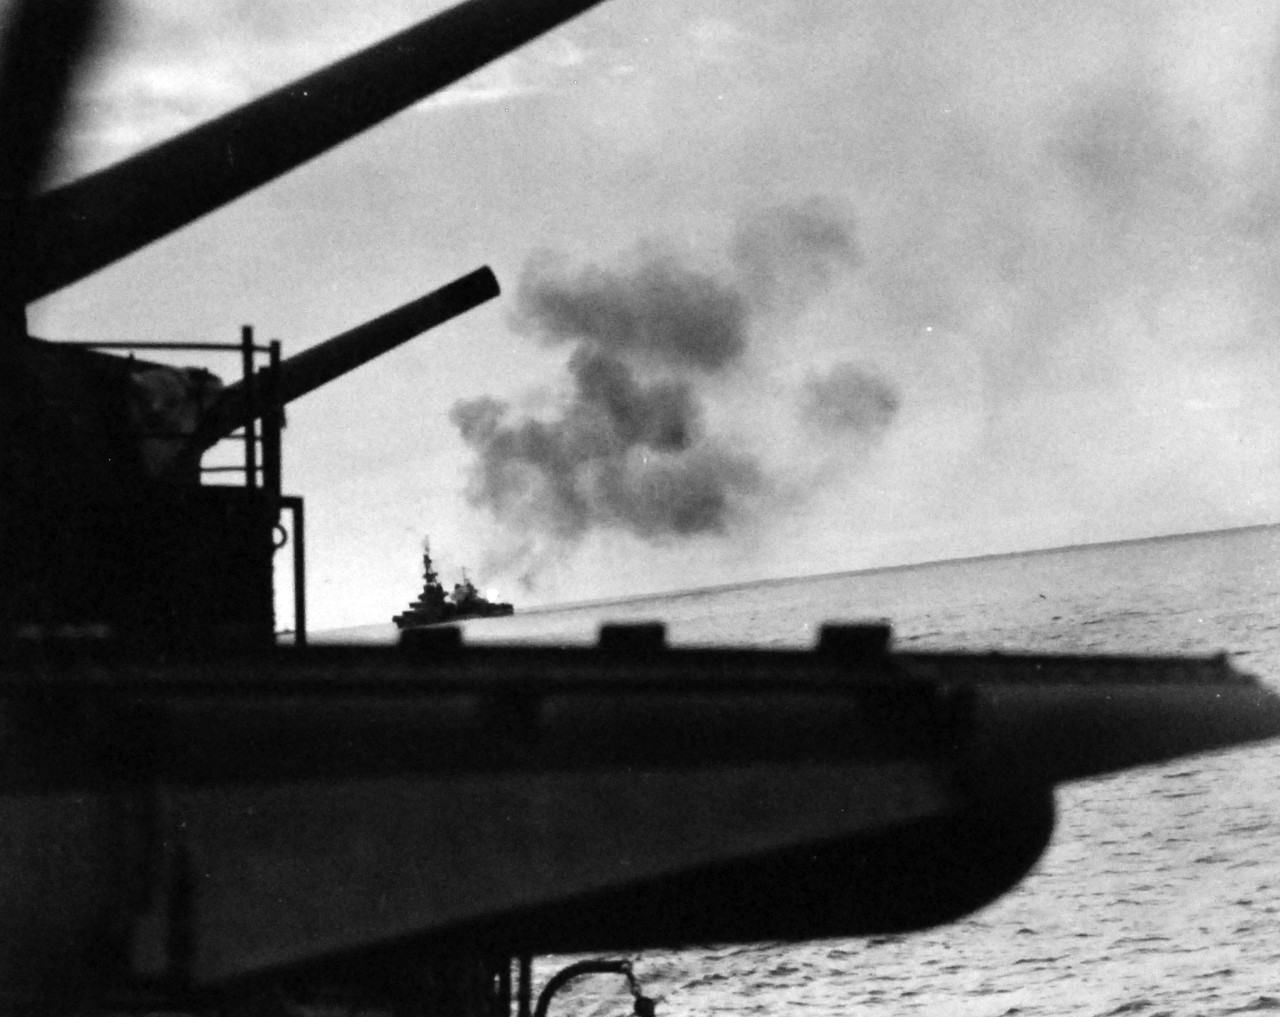 80-G-304999:  Battle for Iwo Jima, February 17, 1945.  5” guns of USS Heywood L. Edwards (DD-663) join in with battleships and cruisers in bombarding Iwo Jima. Official U.S. Navy photograph, now in the collections of the National Archives.  (2016/09/06).